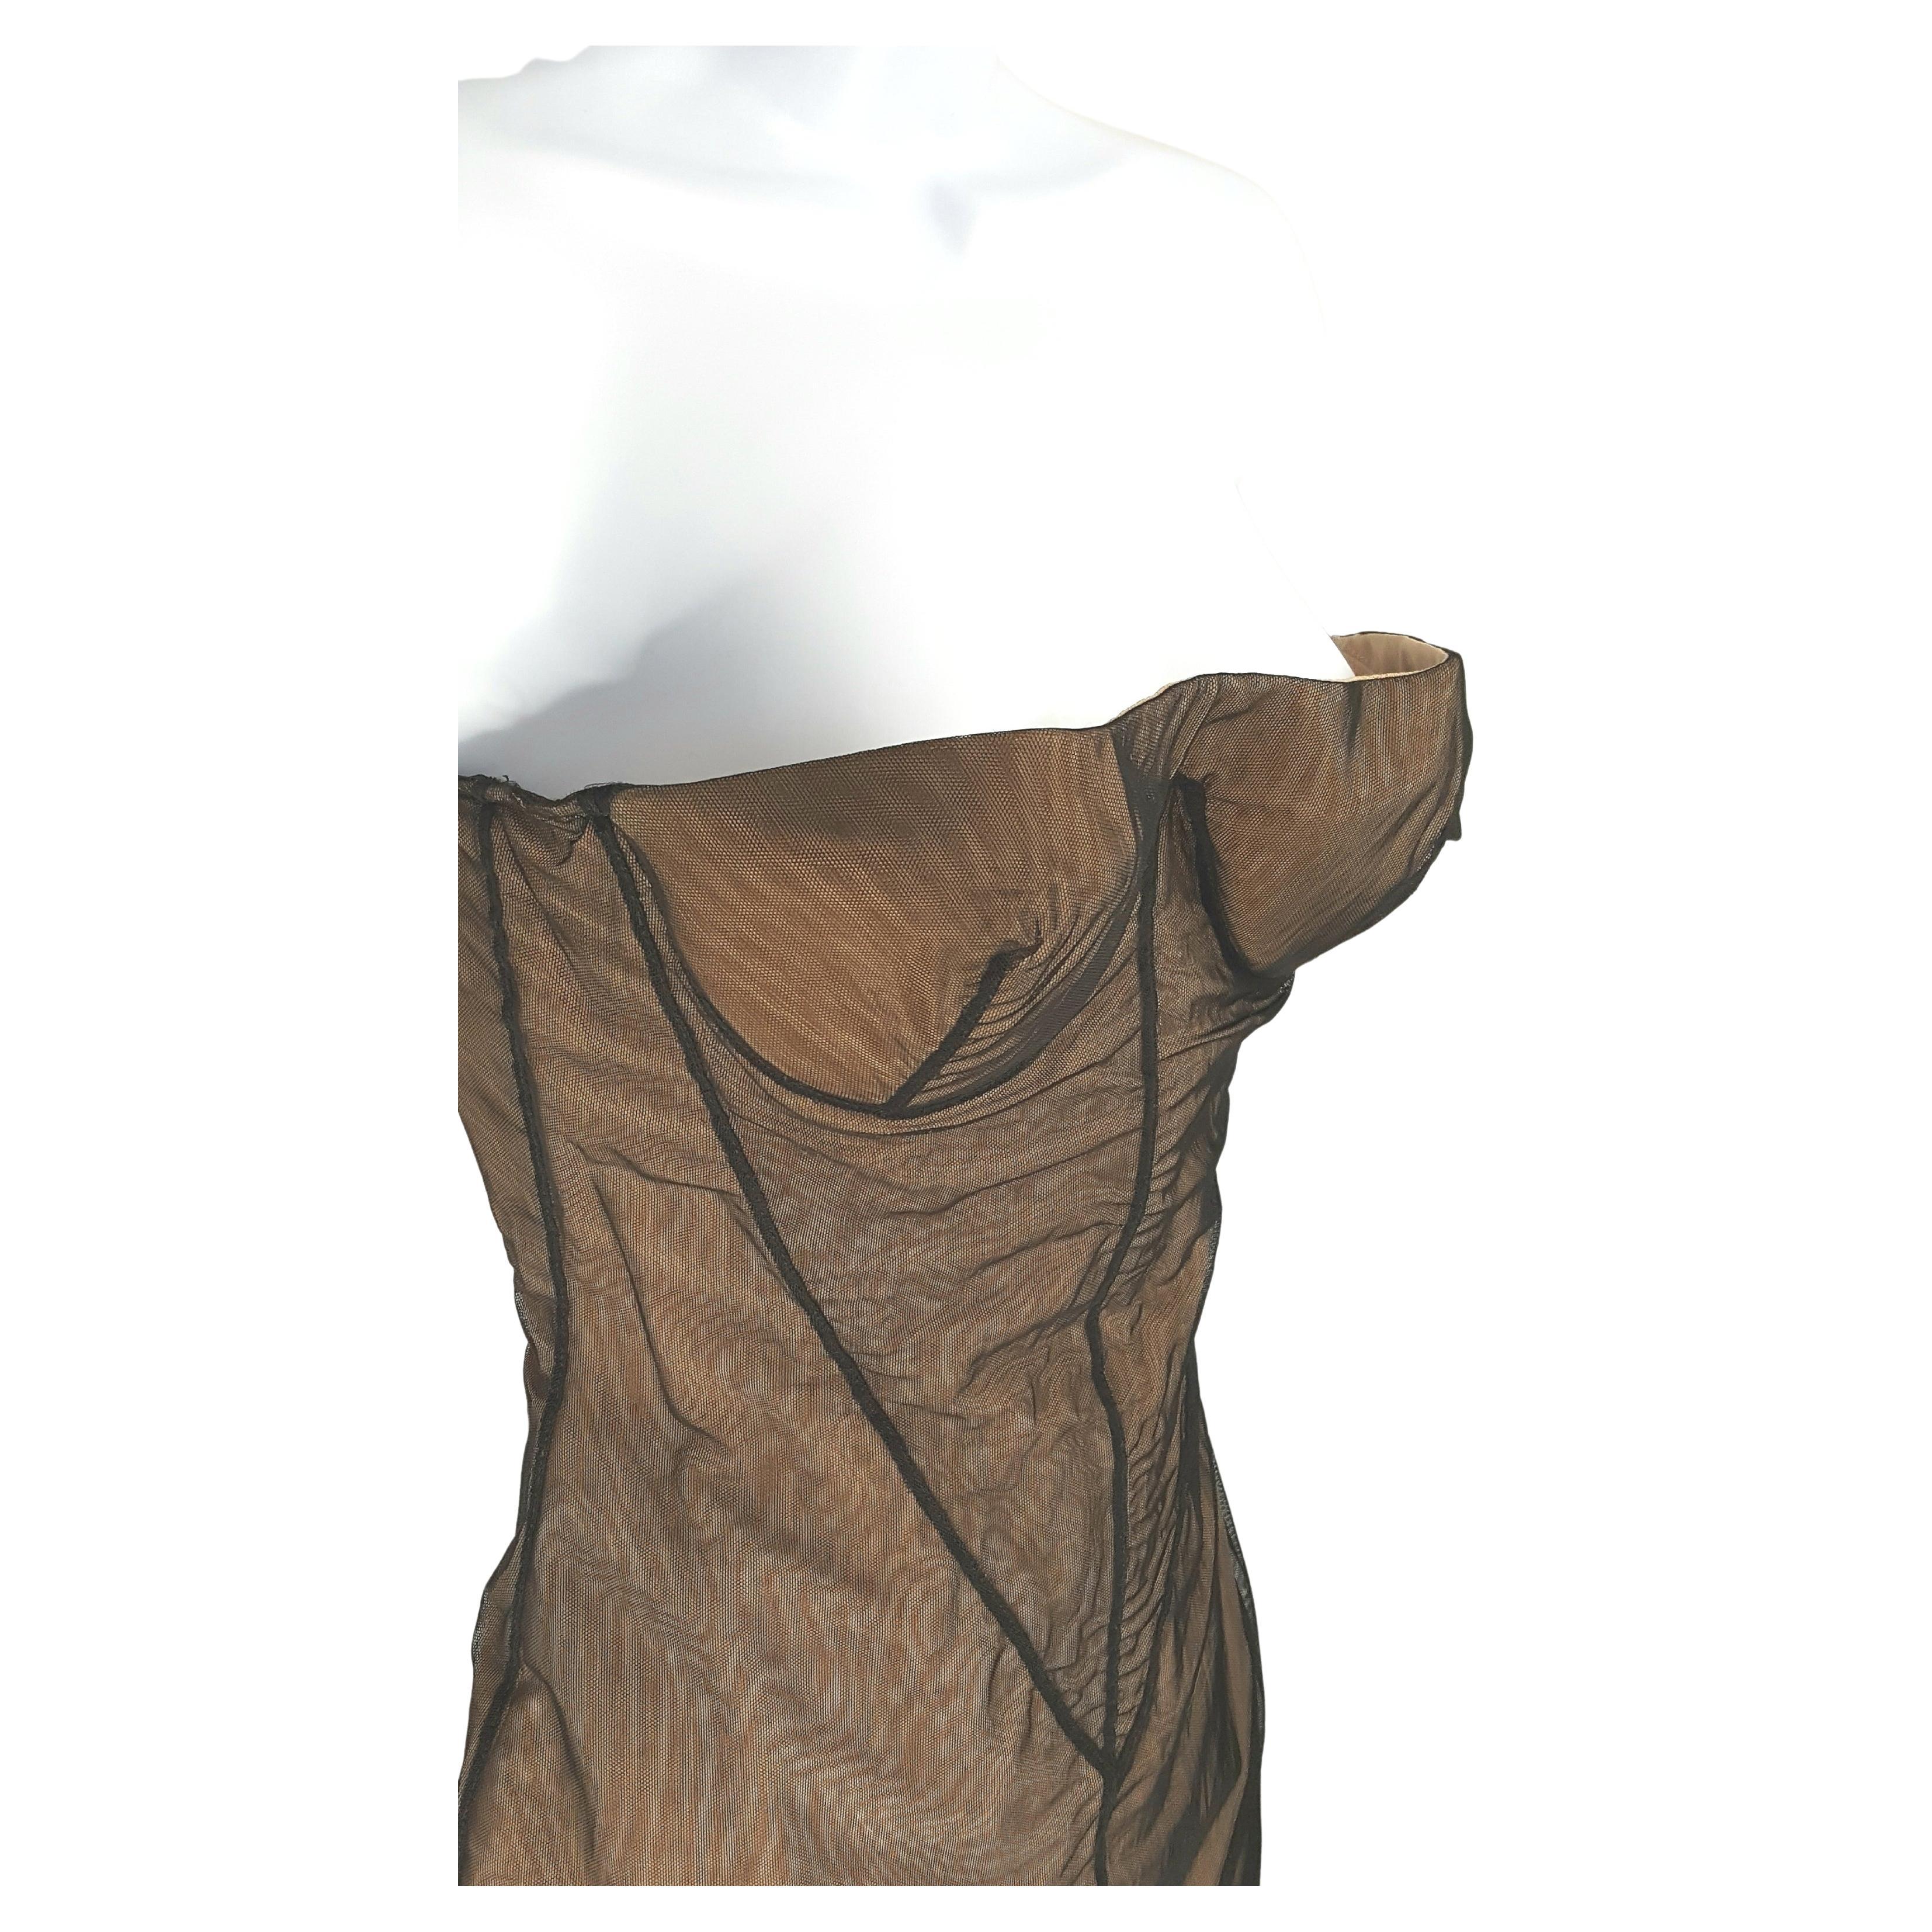 Gucci TomFord 2001 RunwayLook2 Balconette Corset Strapless Tulle AwardYear Dress In Good Condition For Sale In Chicago, IL